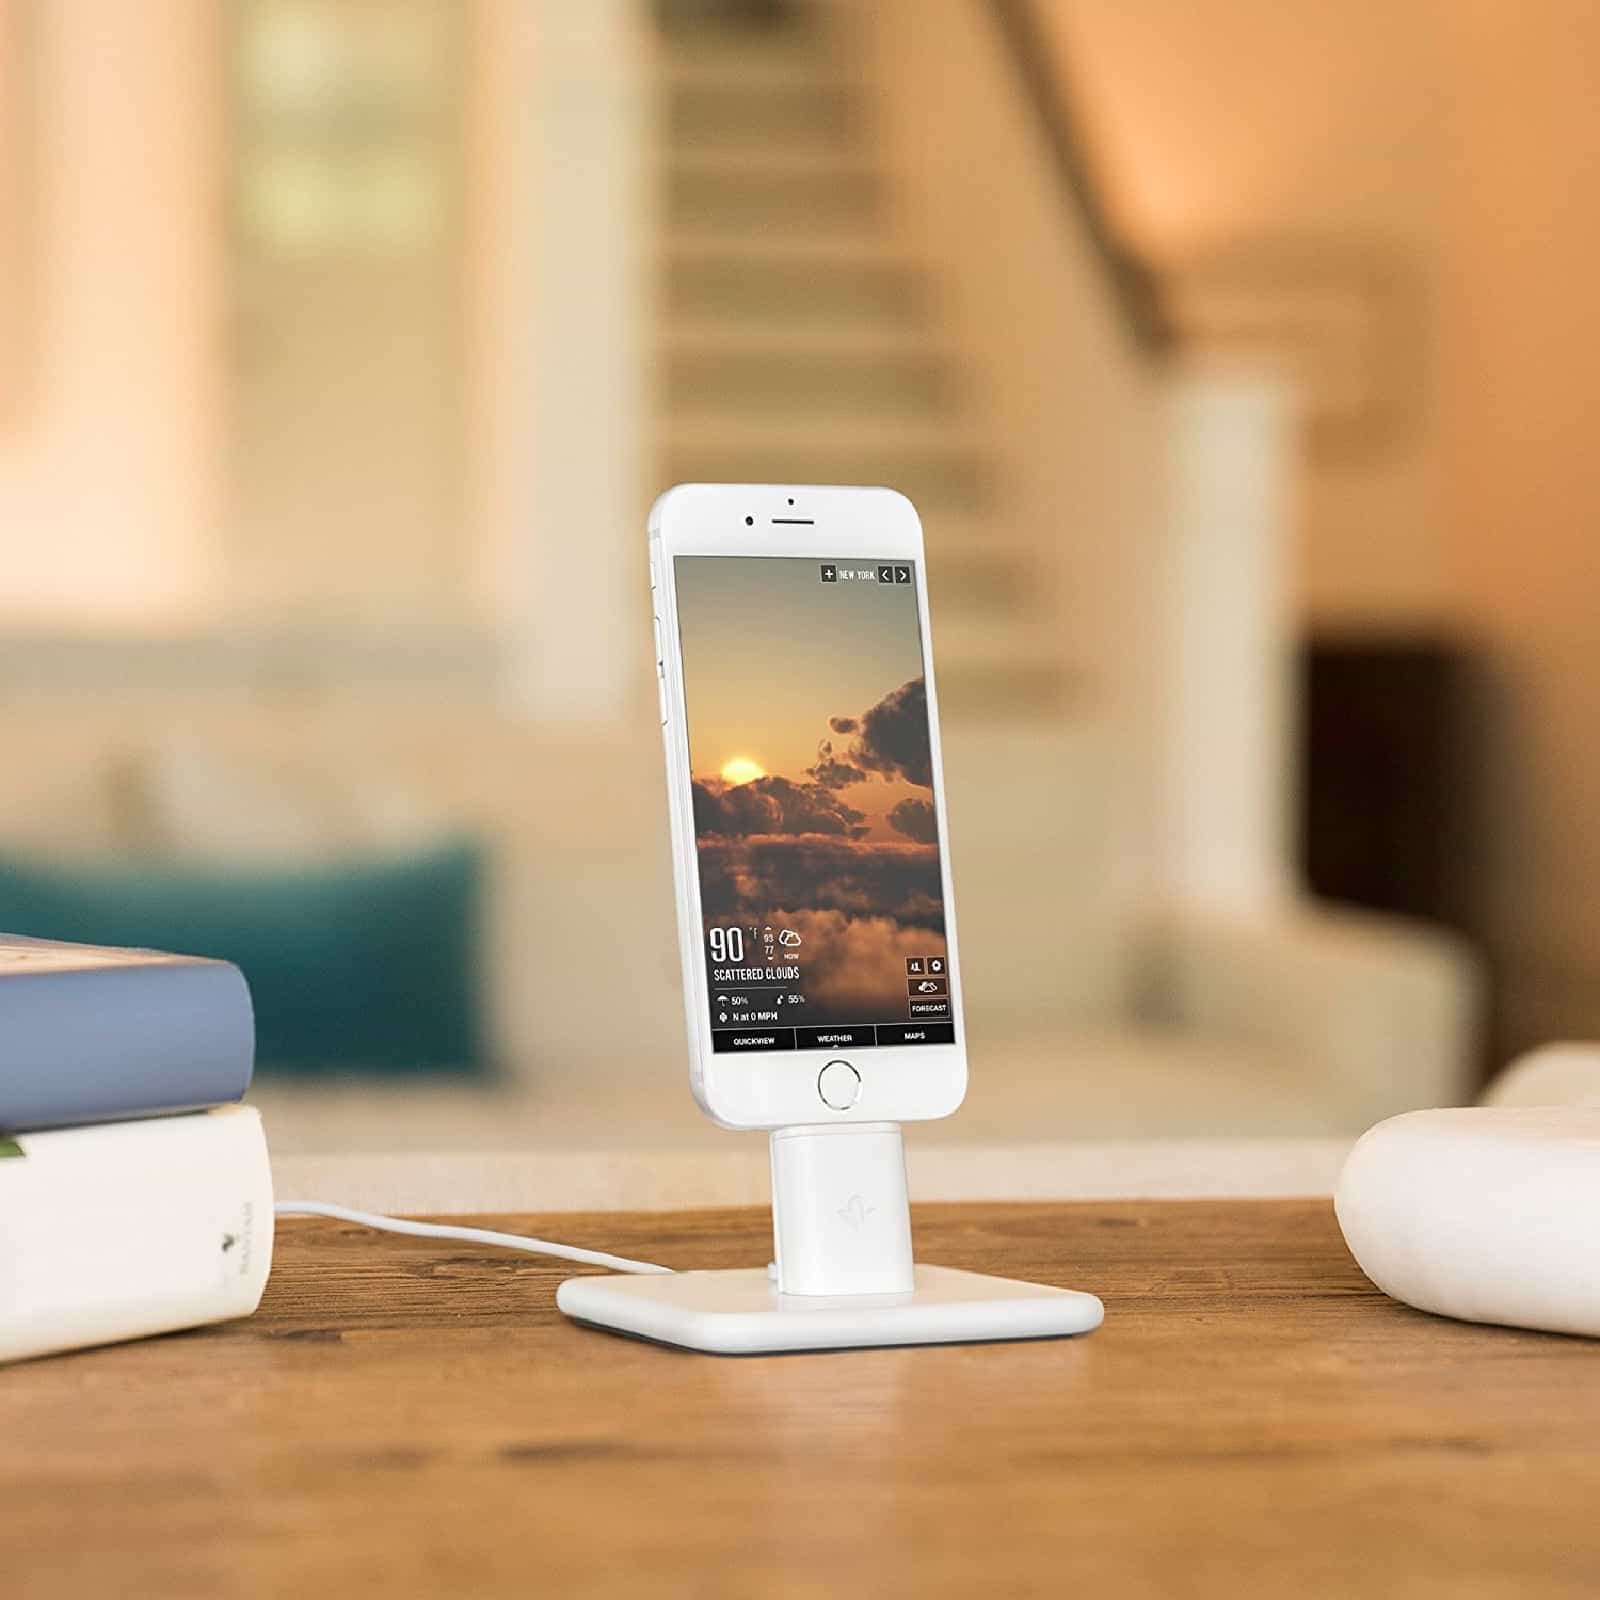 Desk iPhone docks are very convenient.